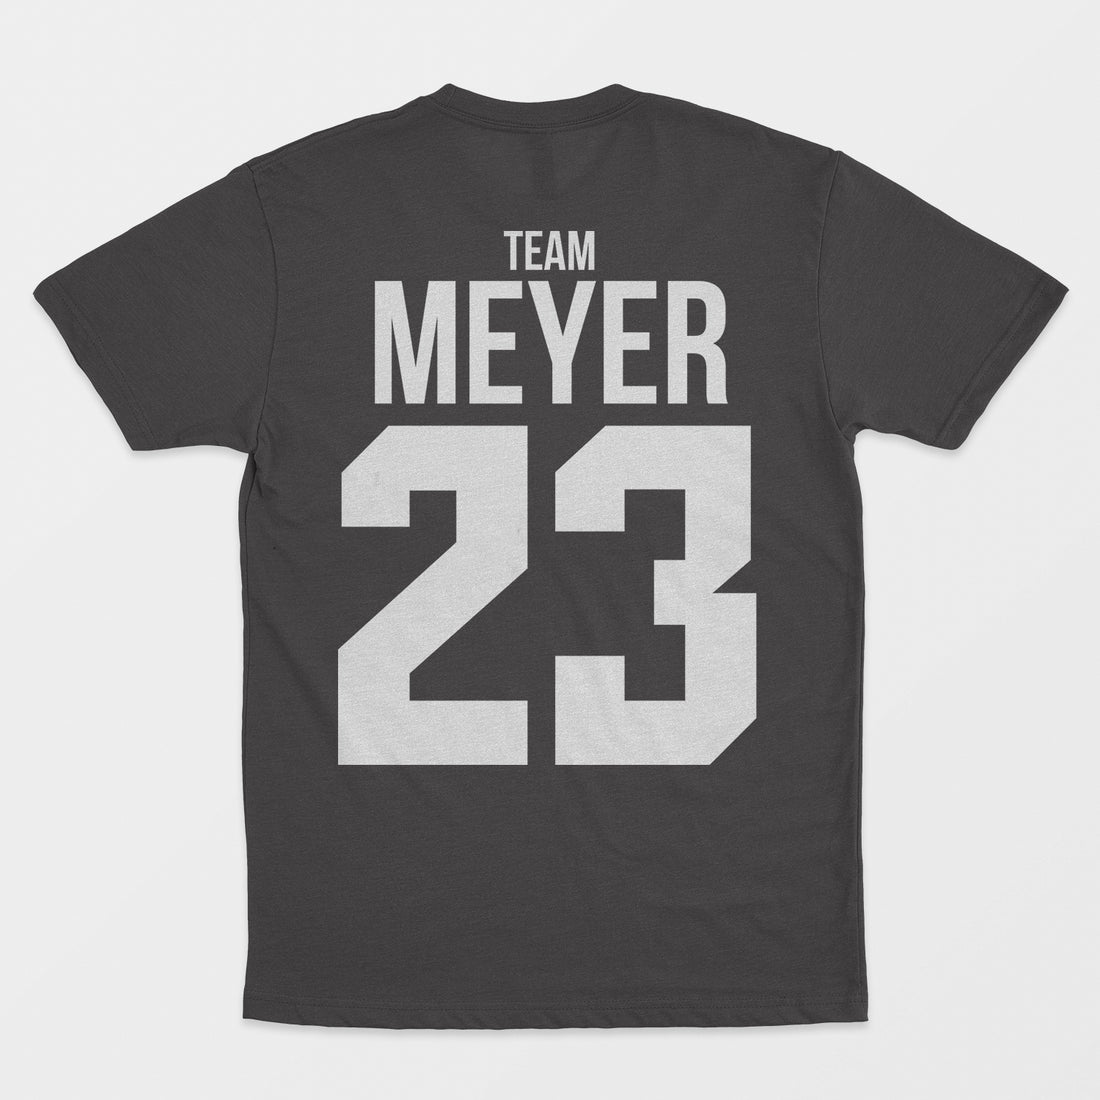 Funny Personalized T-Shirt For Family Team